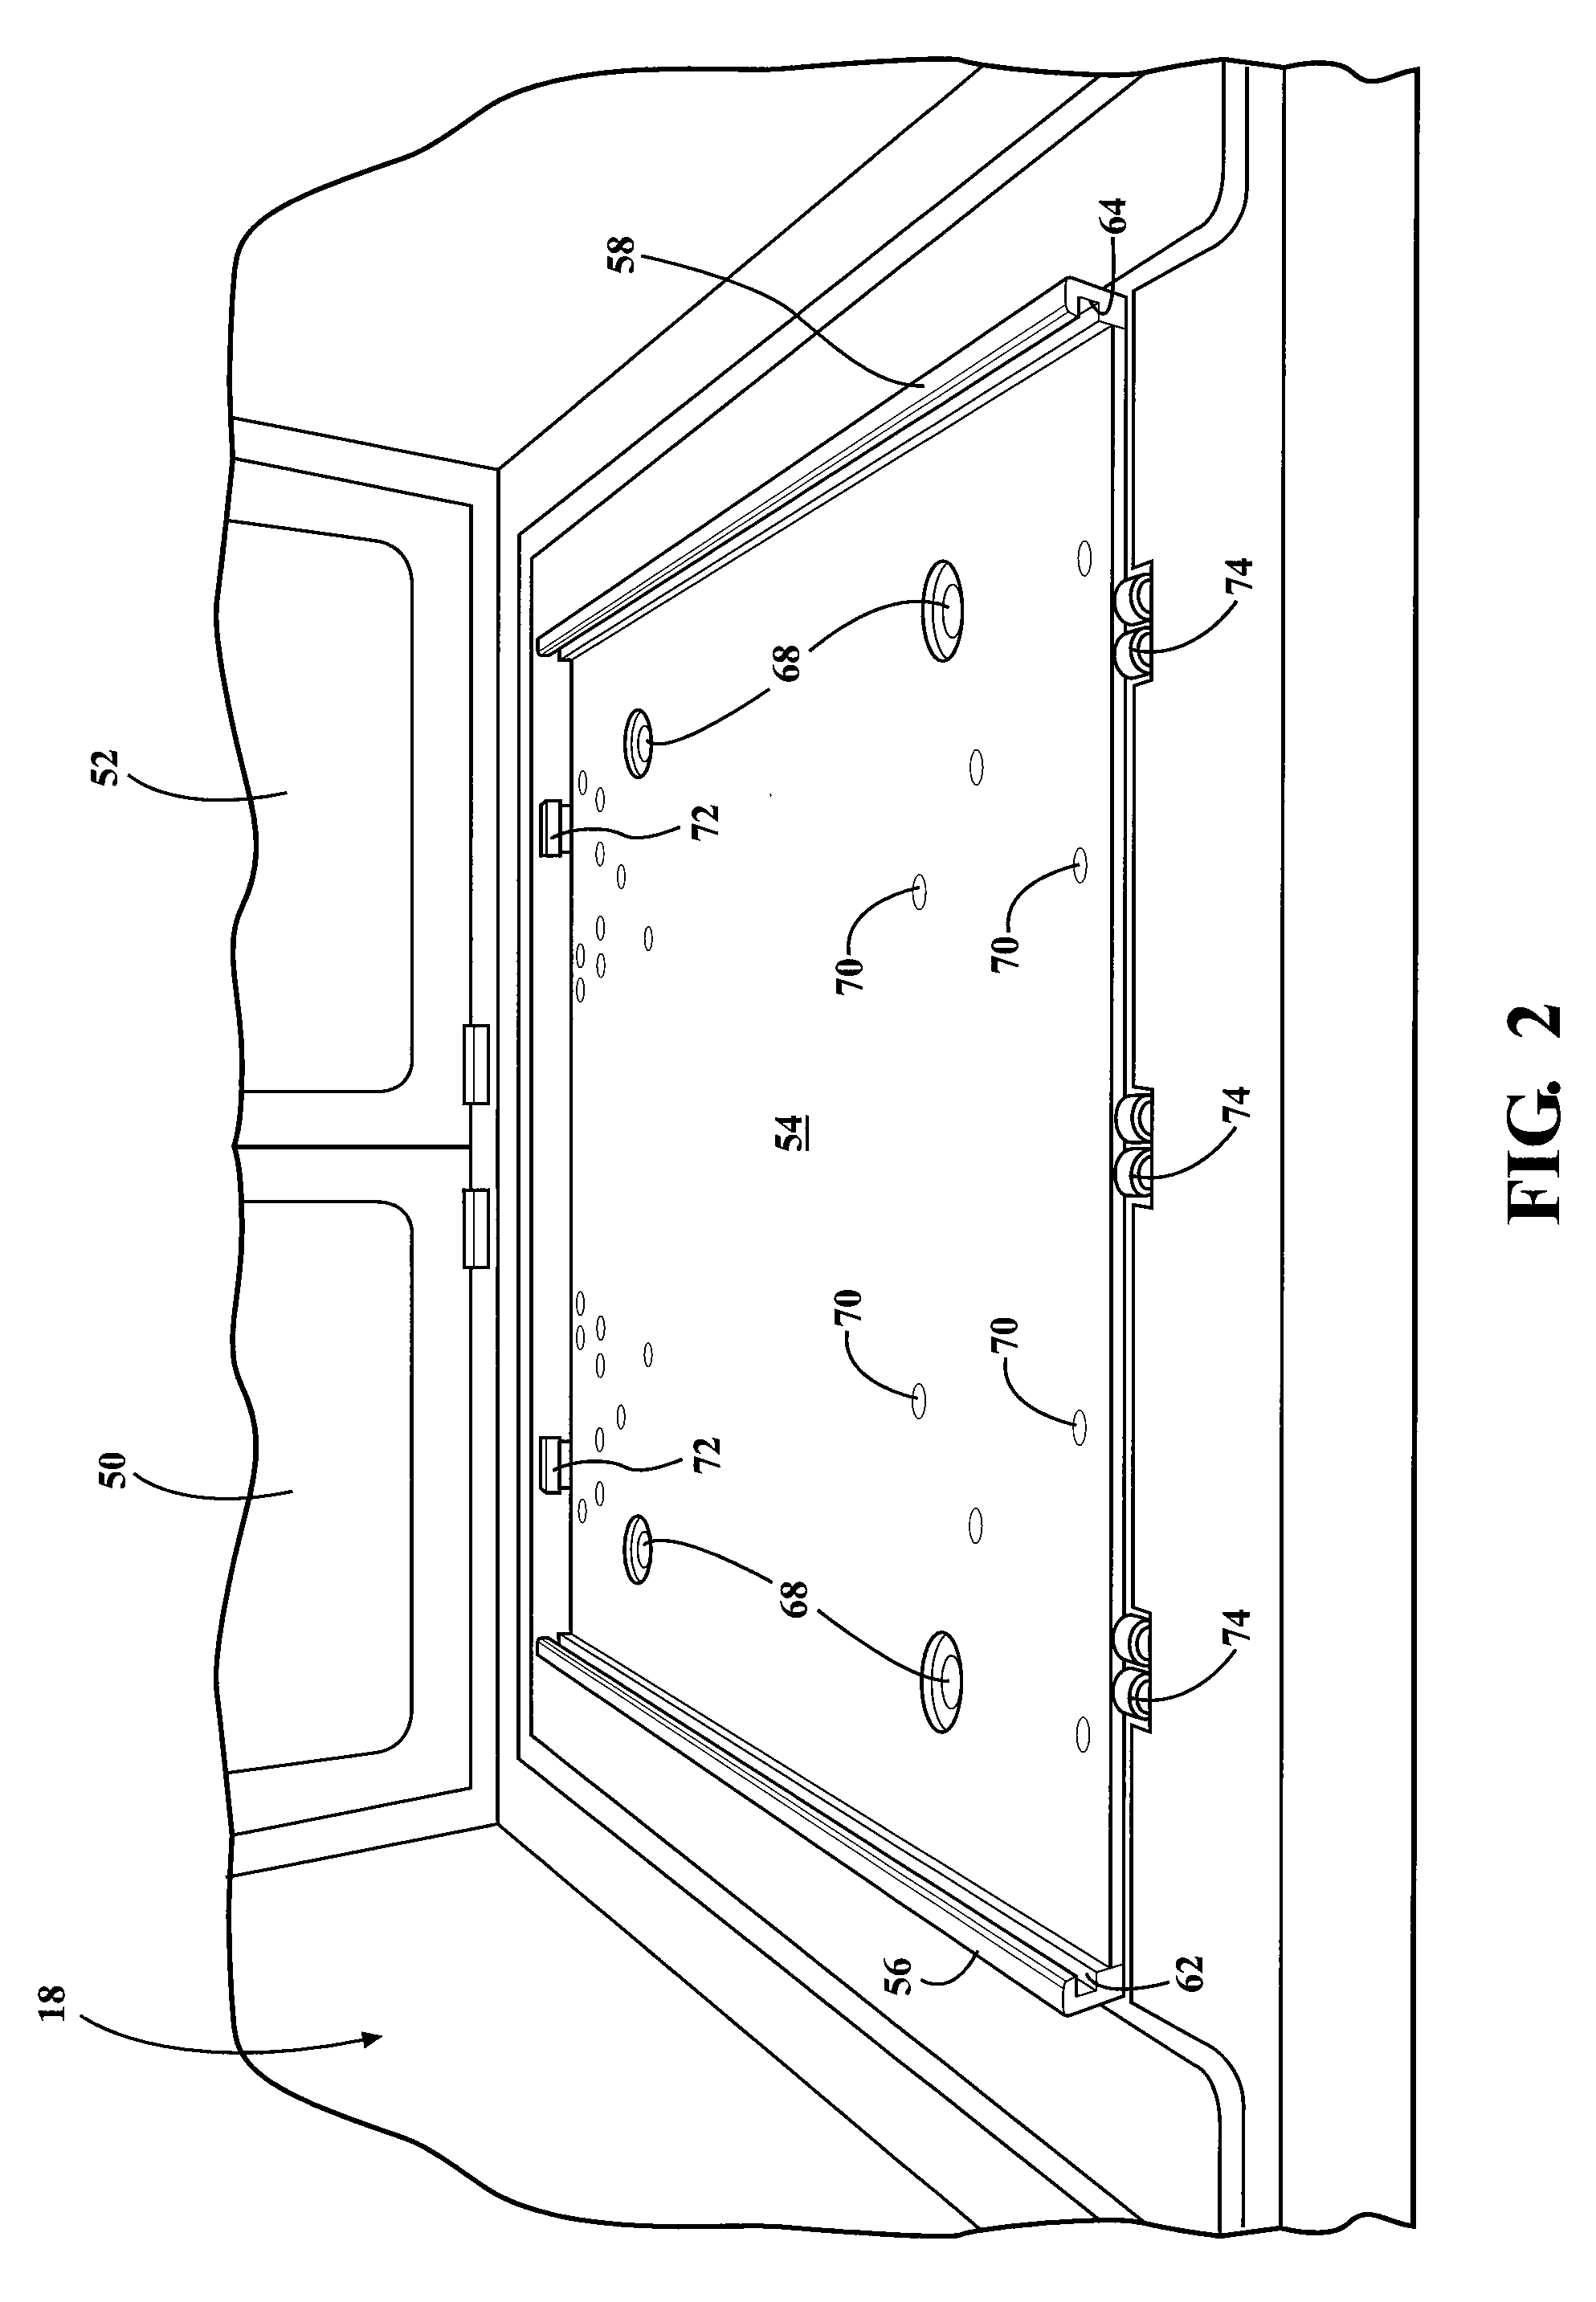 Safety and clamping device for an apparatus for fabricating parts